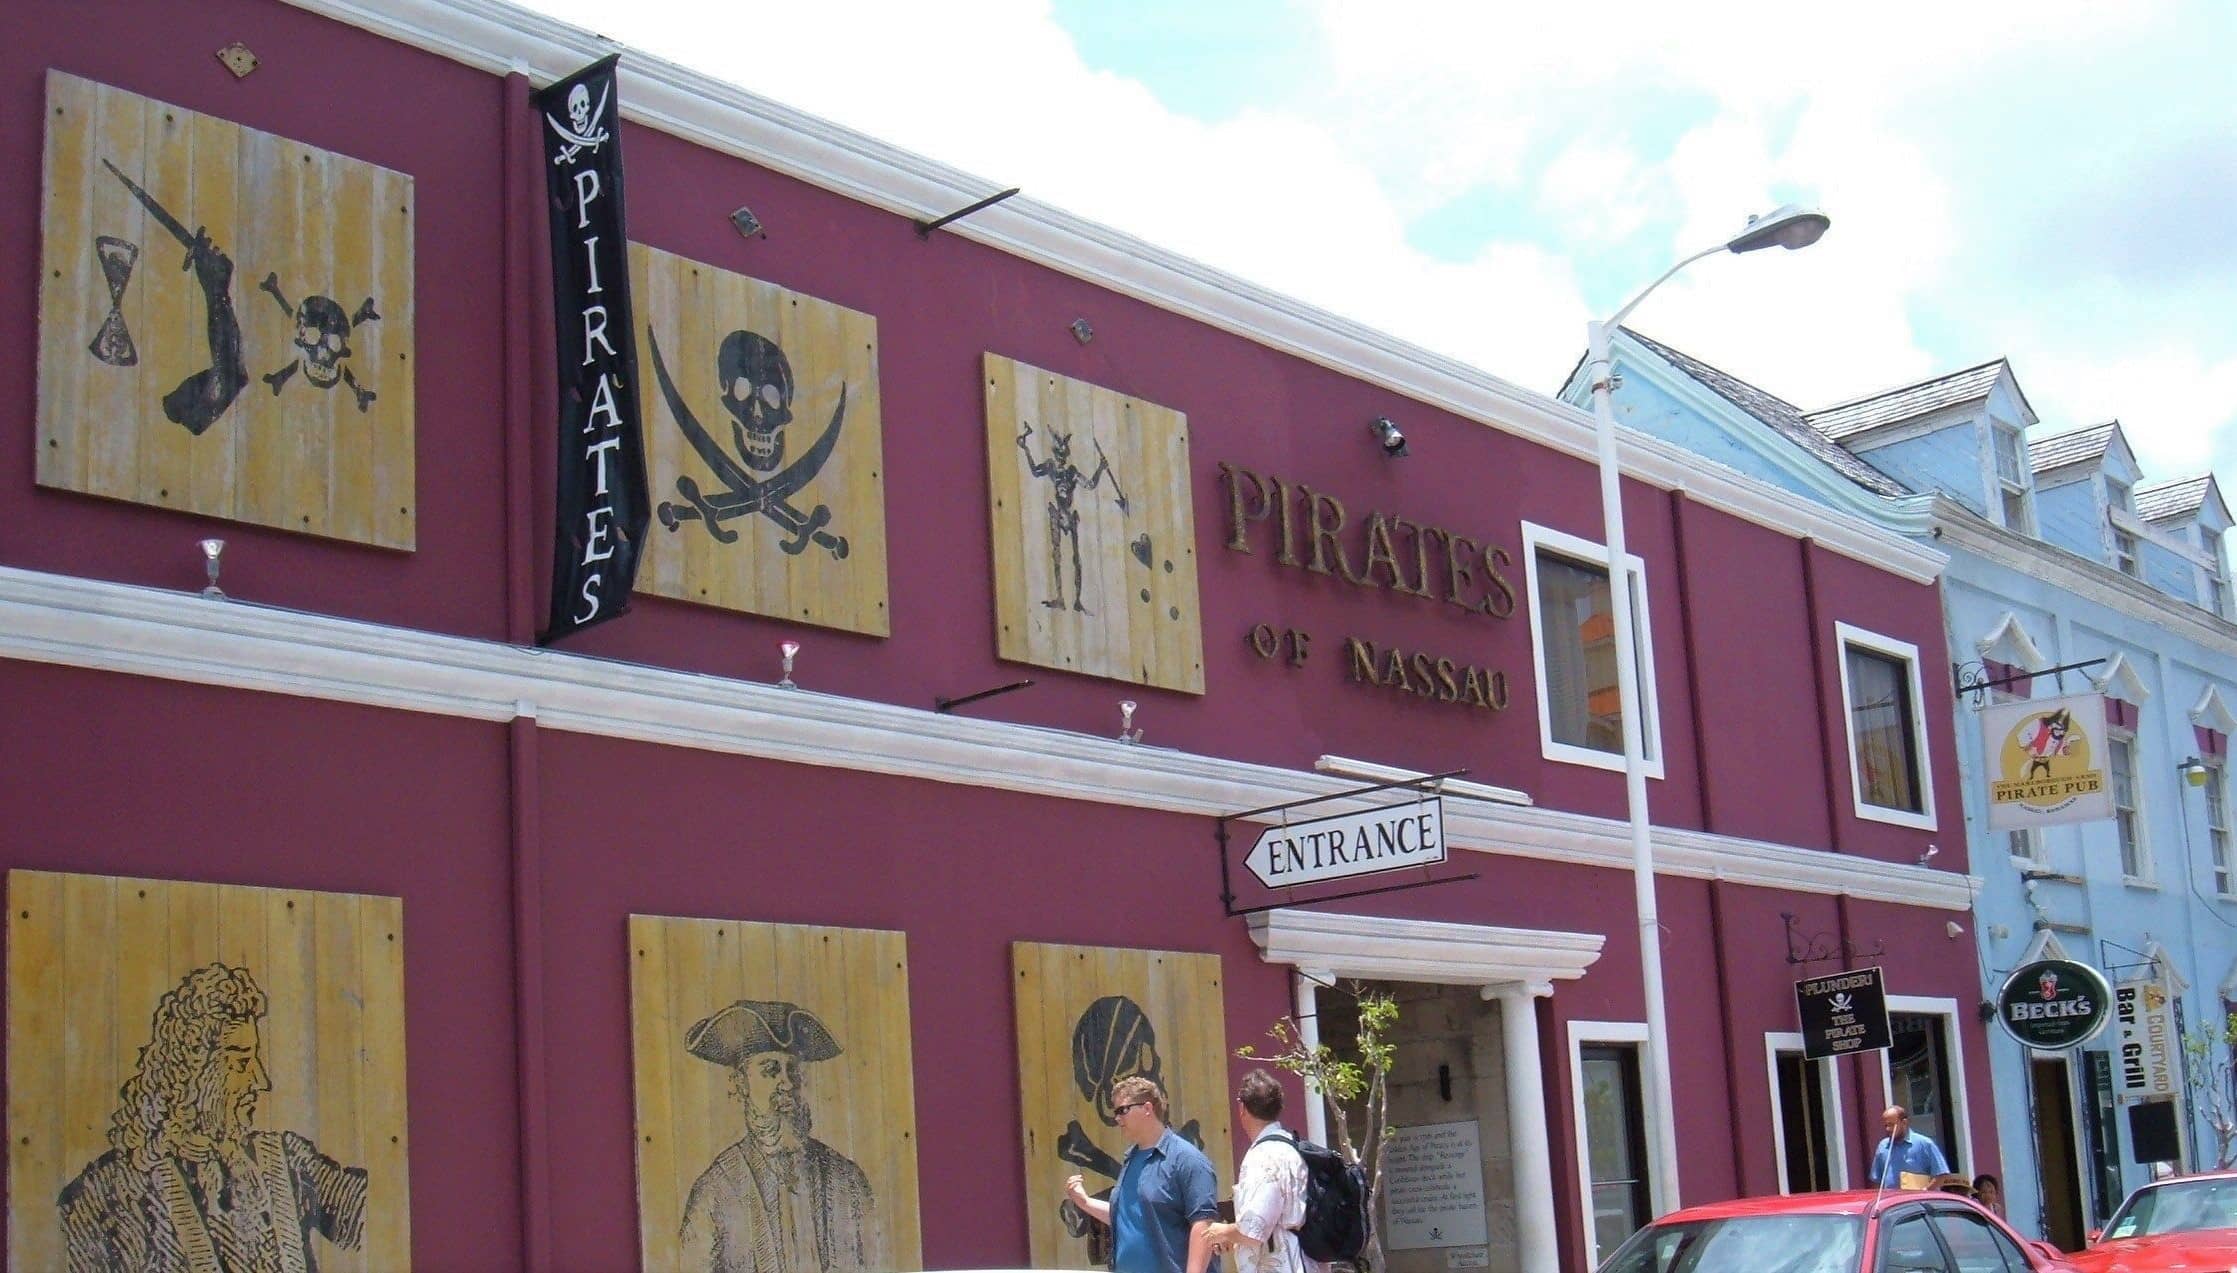 Pirates of Nassau Museum in the Bahamas